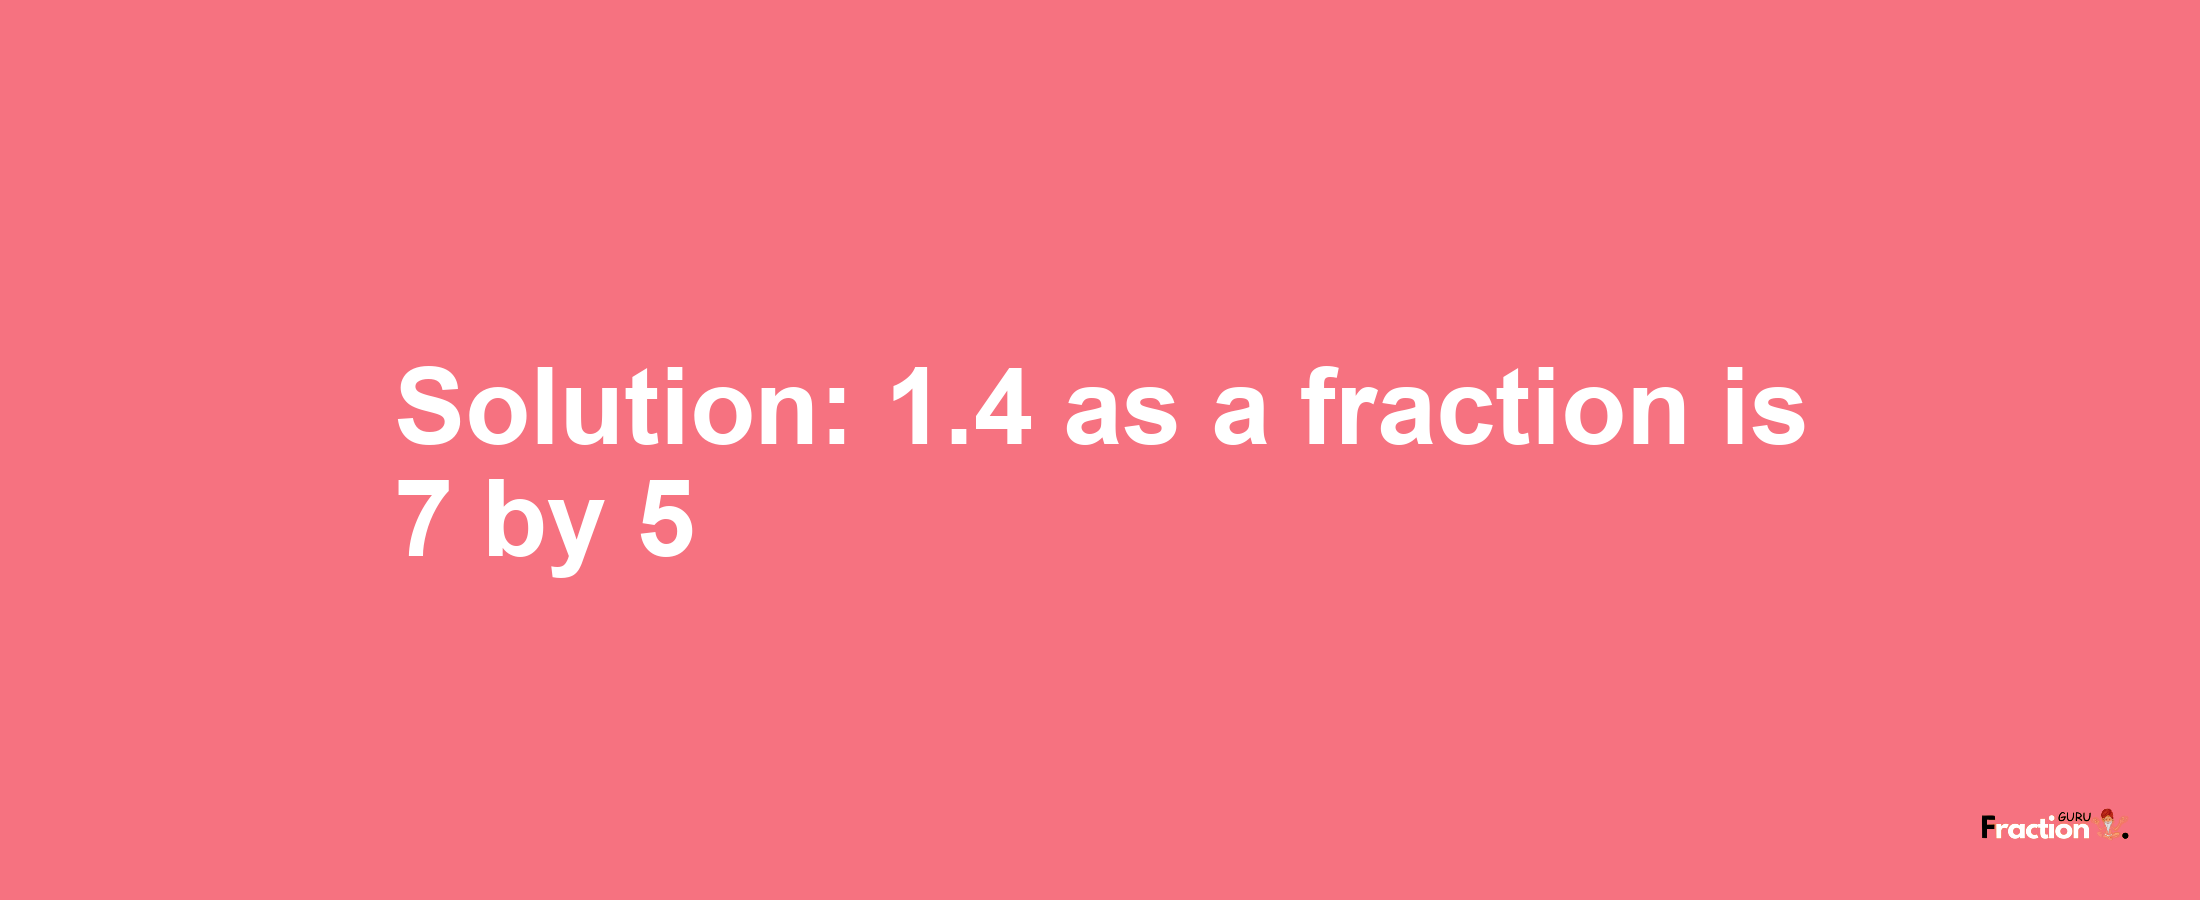 Solution:1.4 as a fraction is 7/5